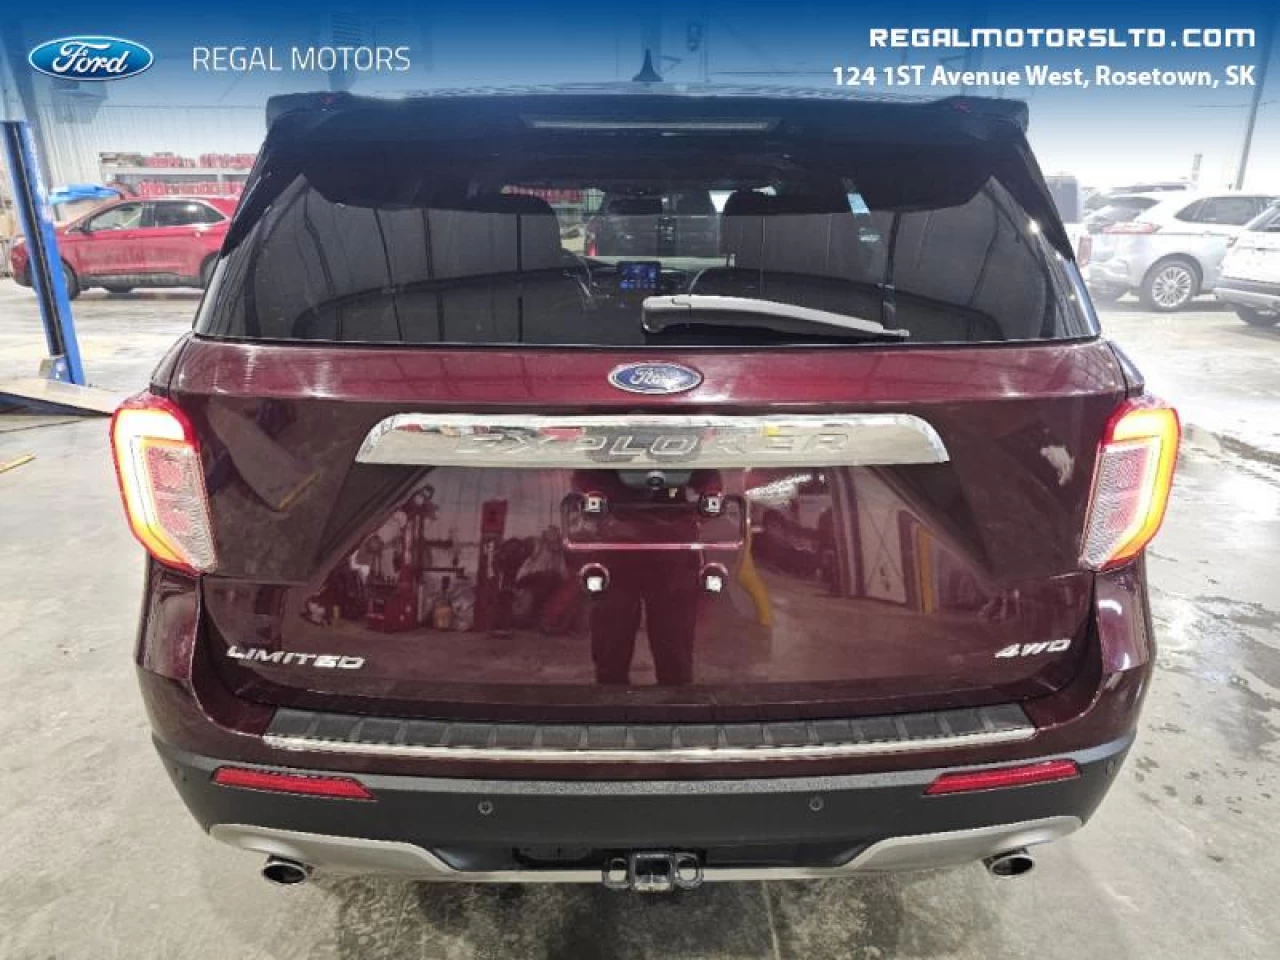 2022 Ford Explorer Limited Main Image